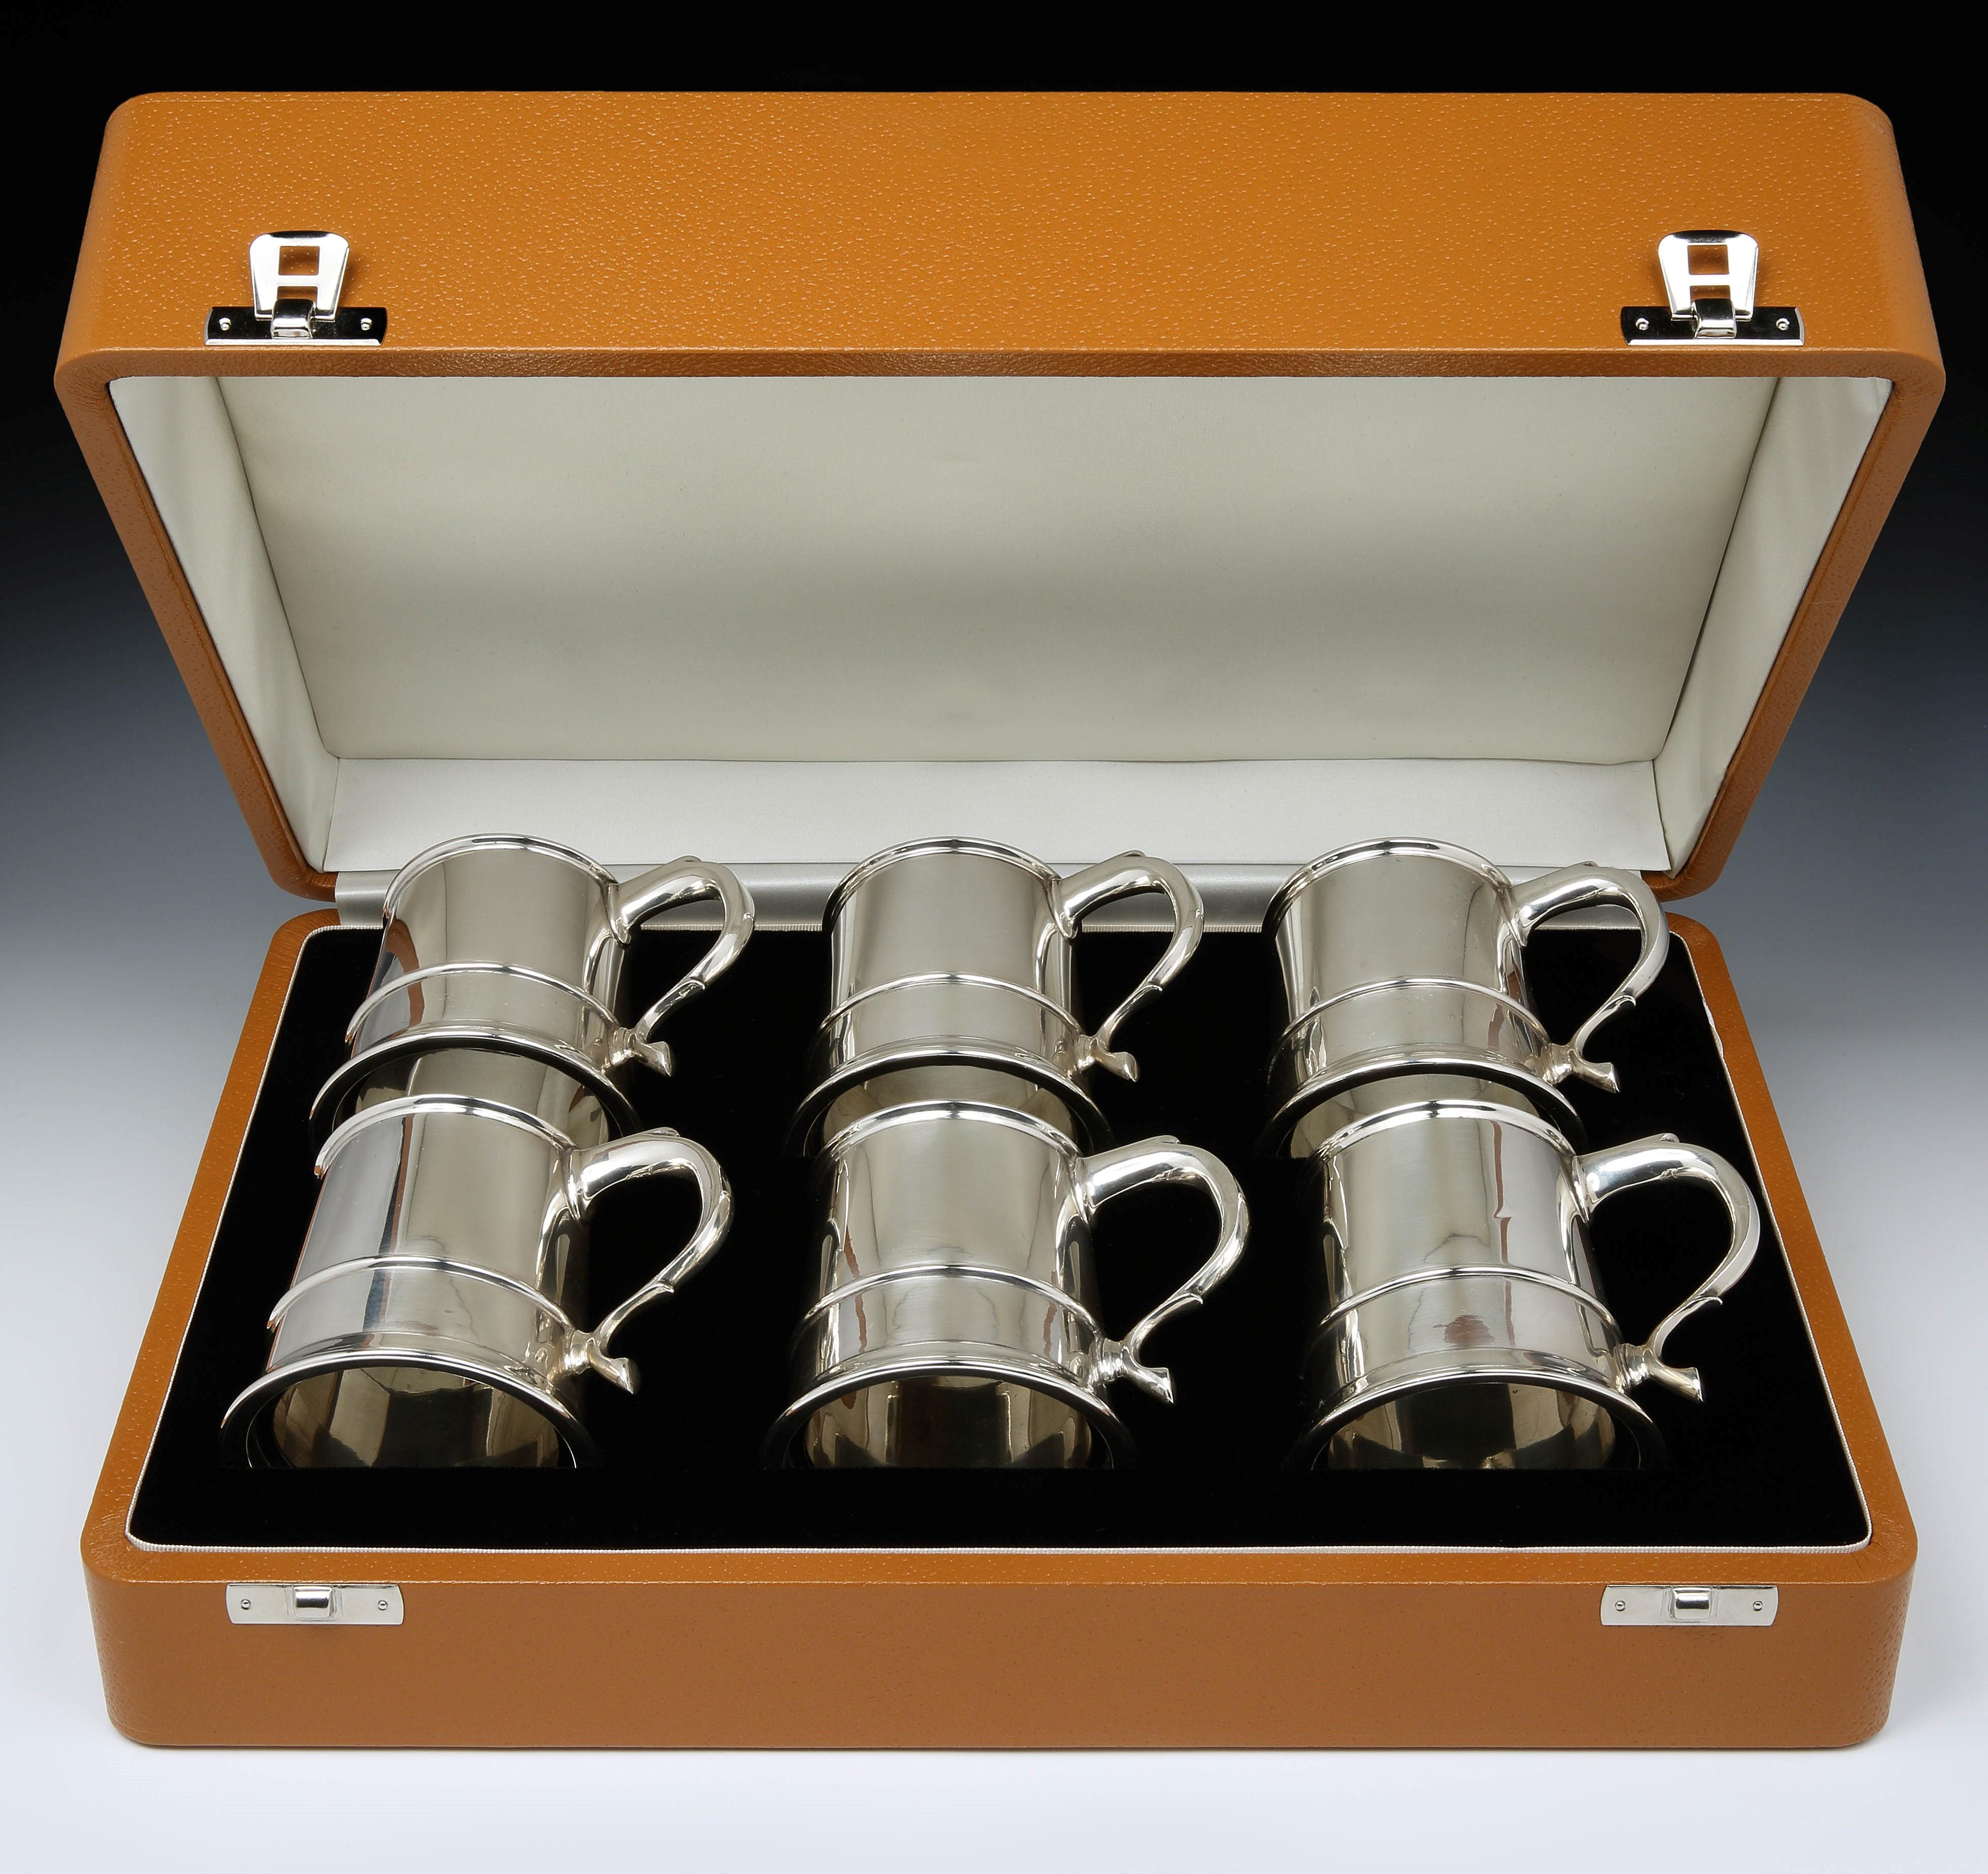 E W Haywood of Birmingham.

A set of six unusual and perfectly proportioned Sterling silver Champagne tankards, each of approximately half-pint capacity, with a tapered body and swept handle, each tankard with a clear glass base. Hallmarked E.W.H